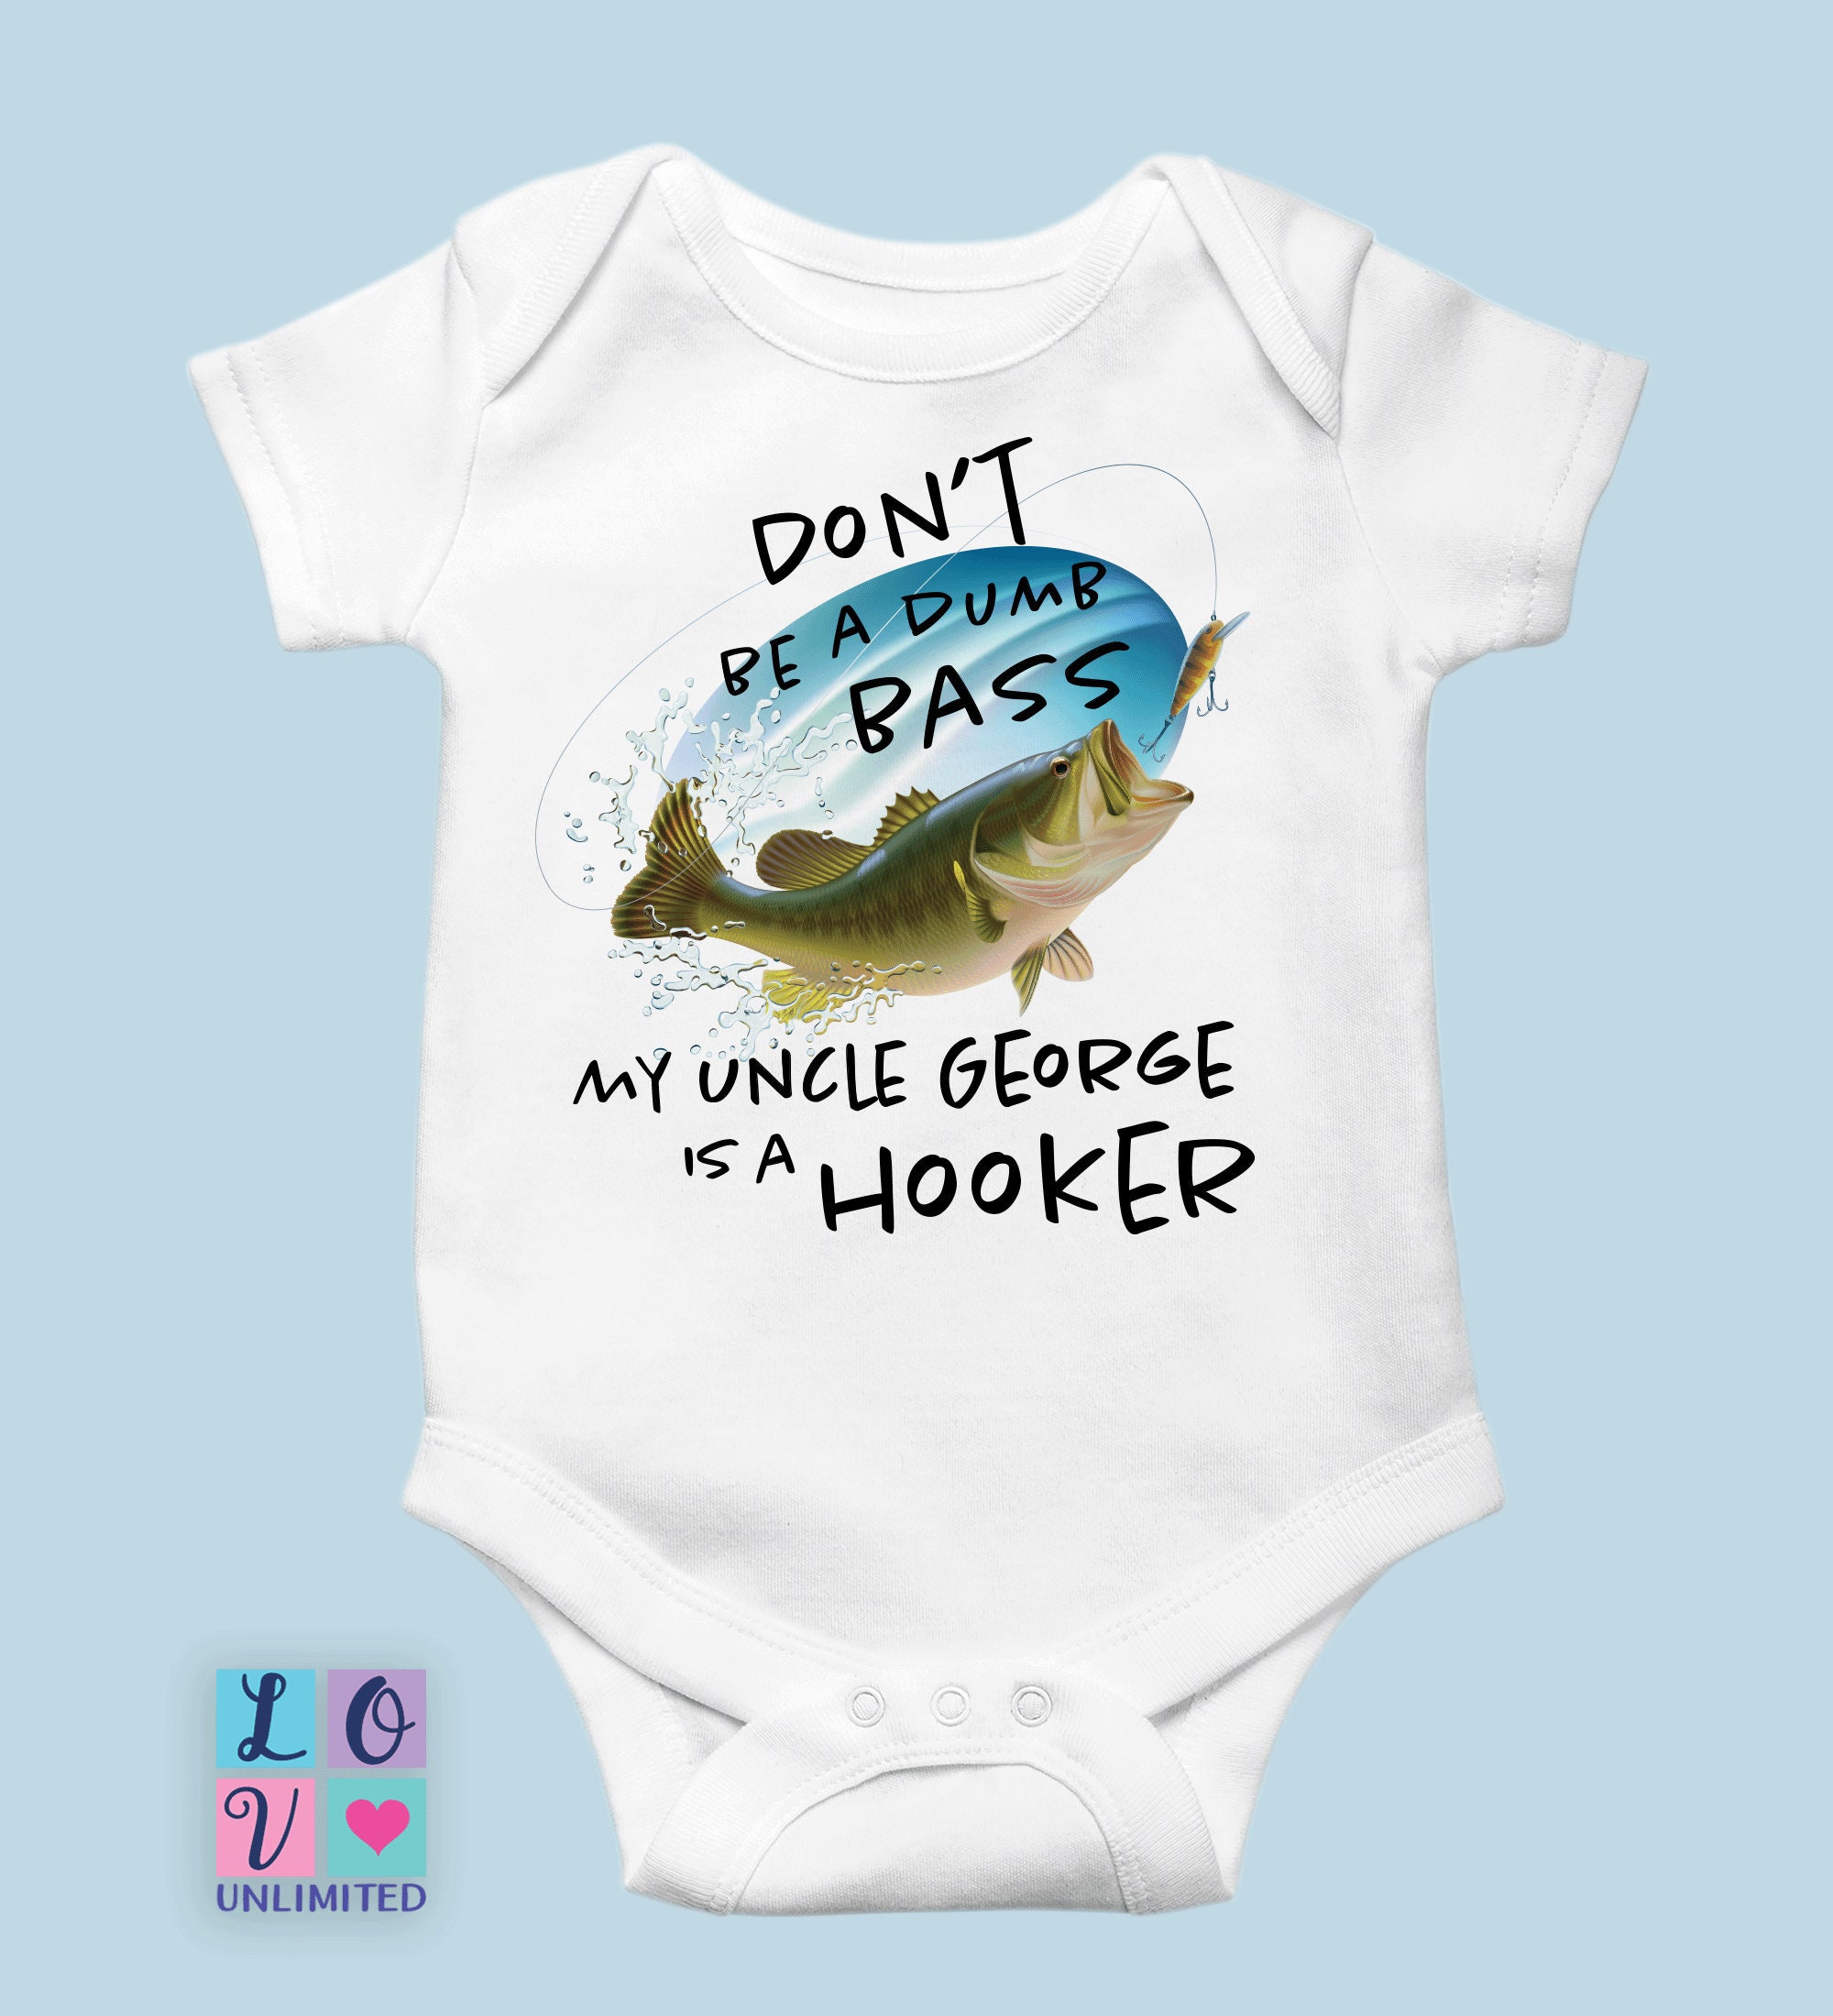 3. Key Features to Consider When Choosing a Personalized Fishing T-Shirt for Uncle